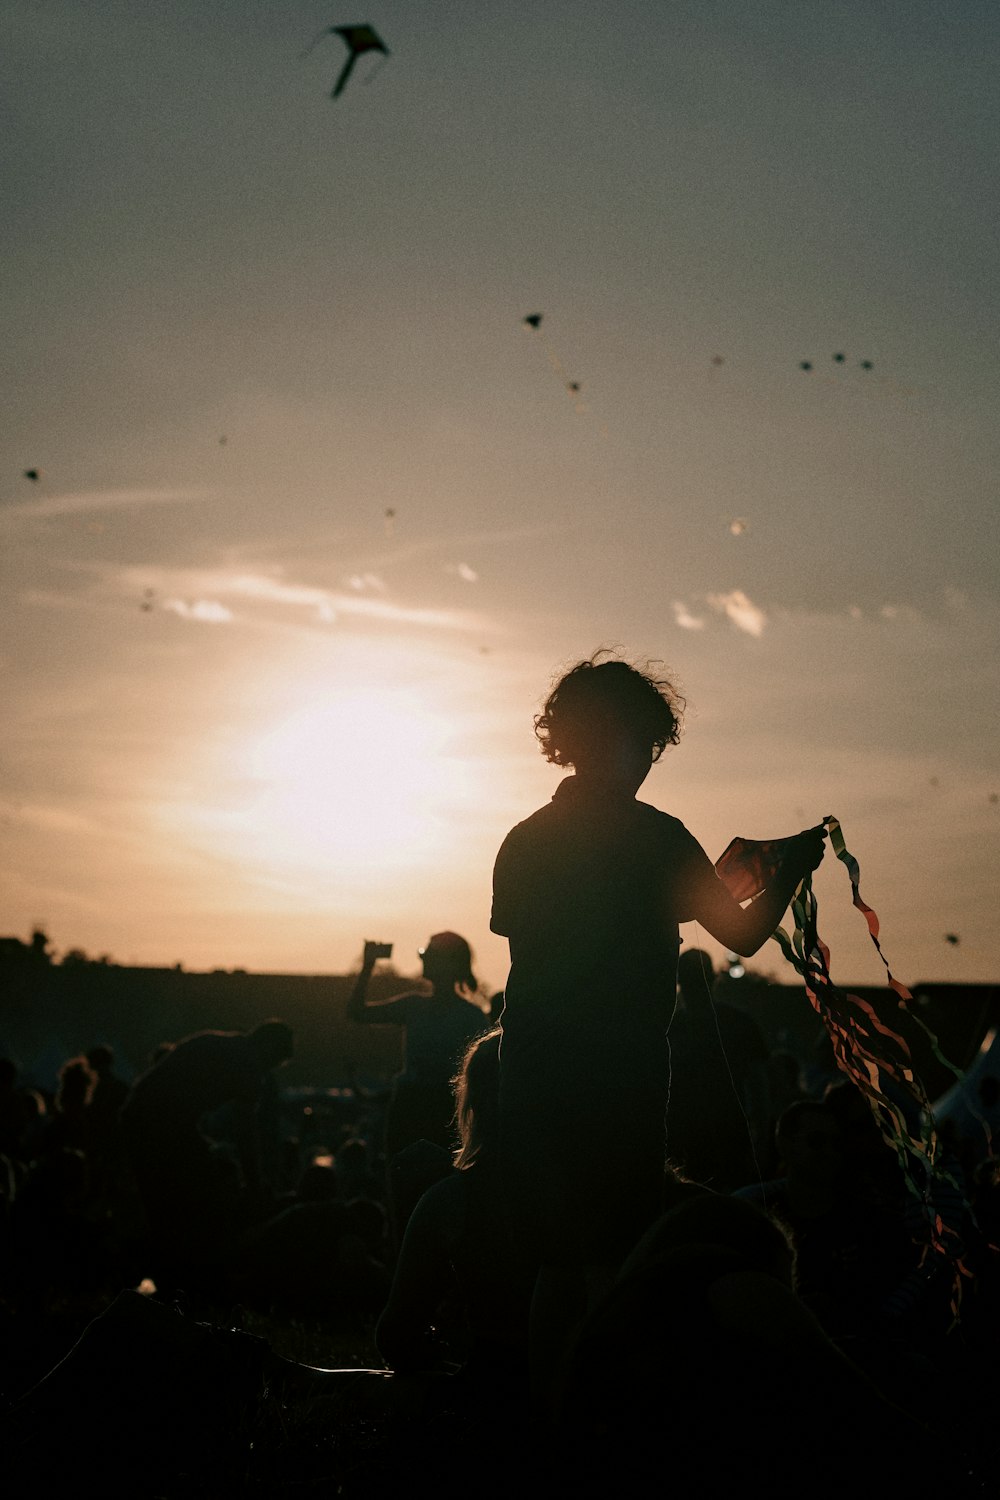 a person holding a kite in front of a sunset